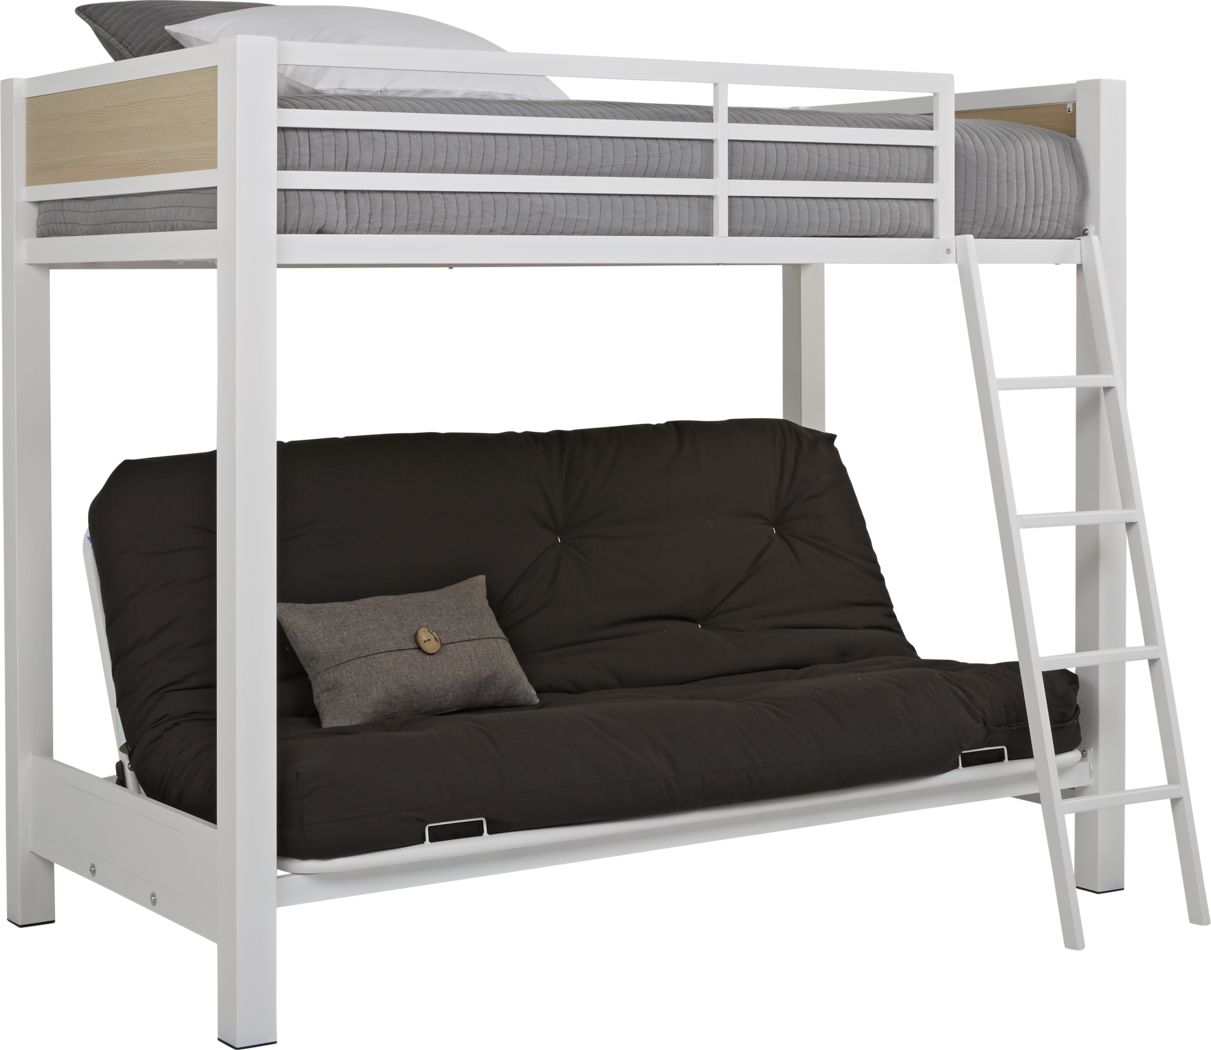 Bunk Beds For Kids, Full Over Full Bunk Beds Rooms To Go